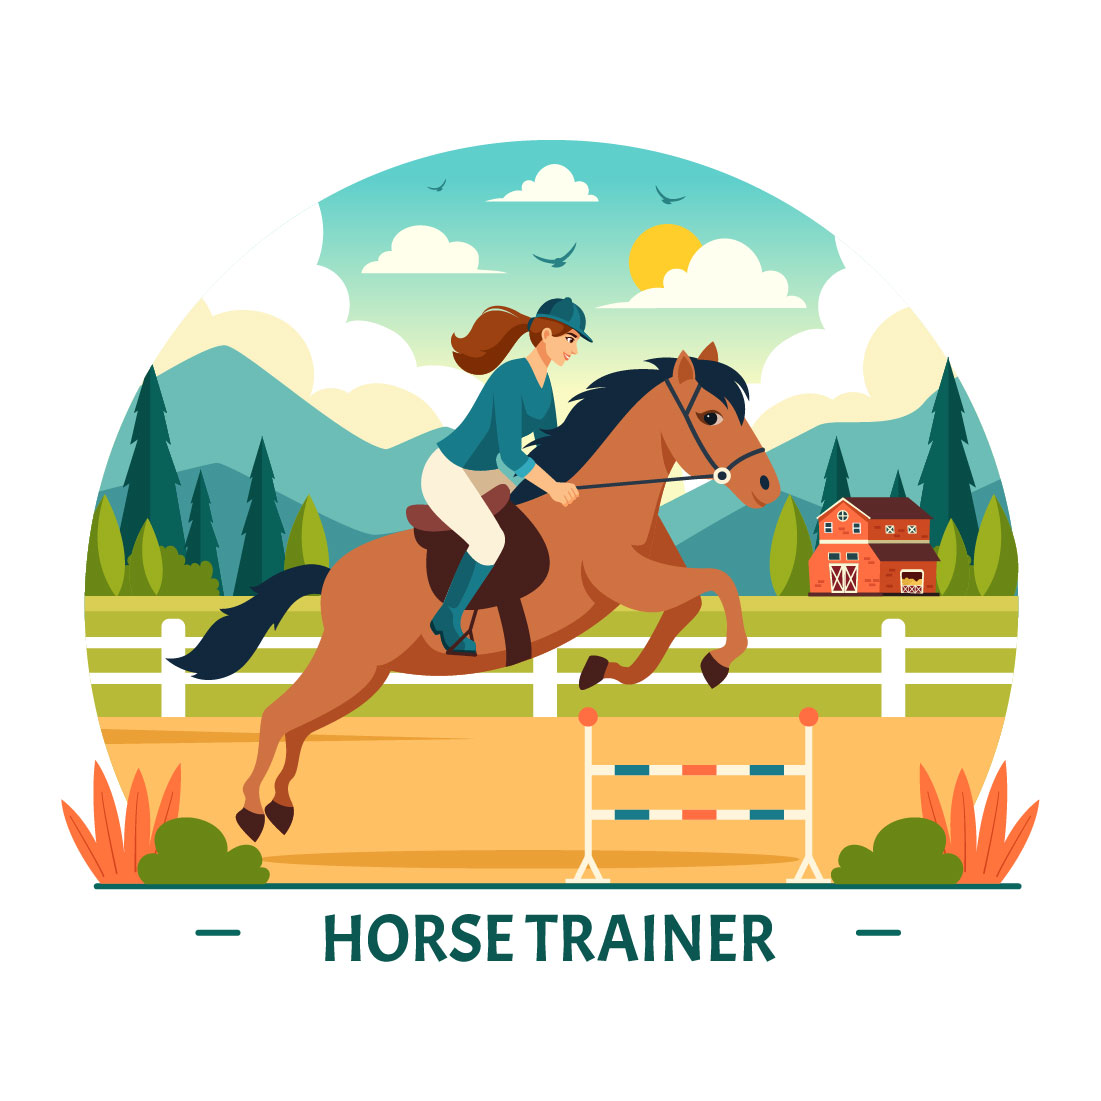 10 Horse Trainer Illustration preview image.